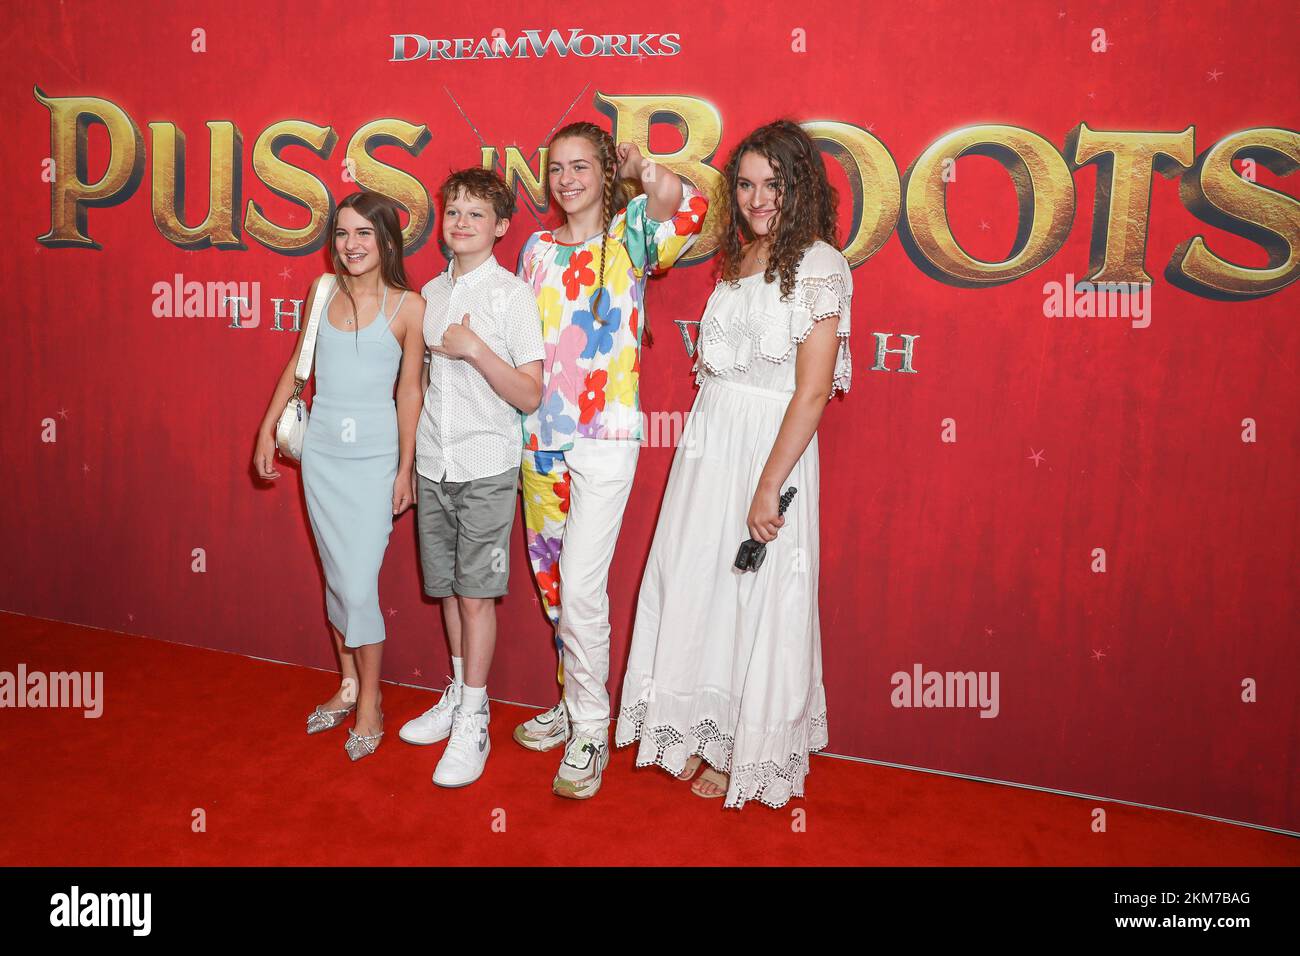 November 26, 2022: NAZ NORRIS, BIGGY NORRIS, SOCKIE NORRIS and SABRE NORRIS  attending the Sydney Premiere of 'Puss In Boots: The Last Wish' at The  State Theatre on November 26, 2022 in